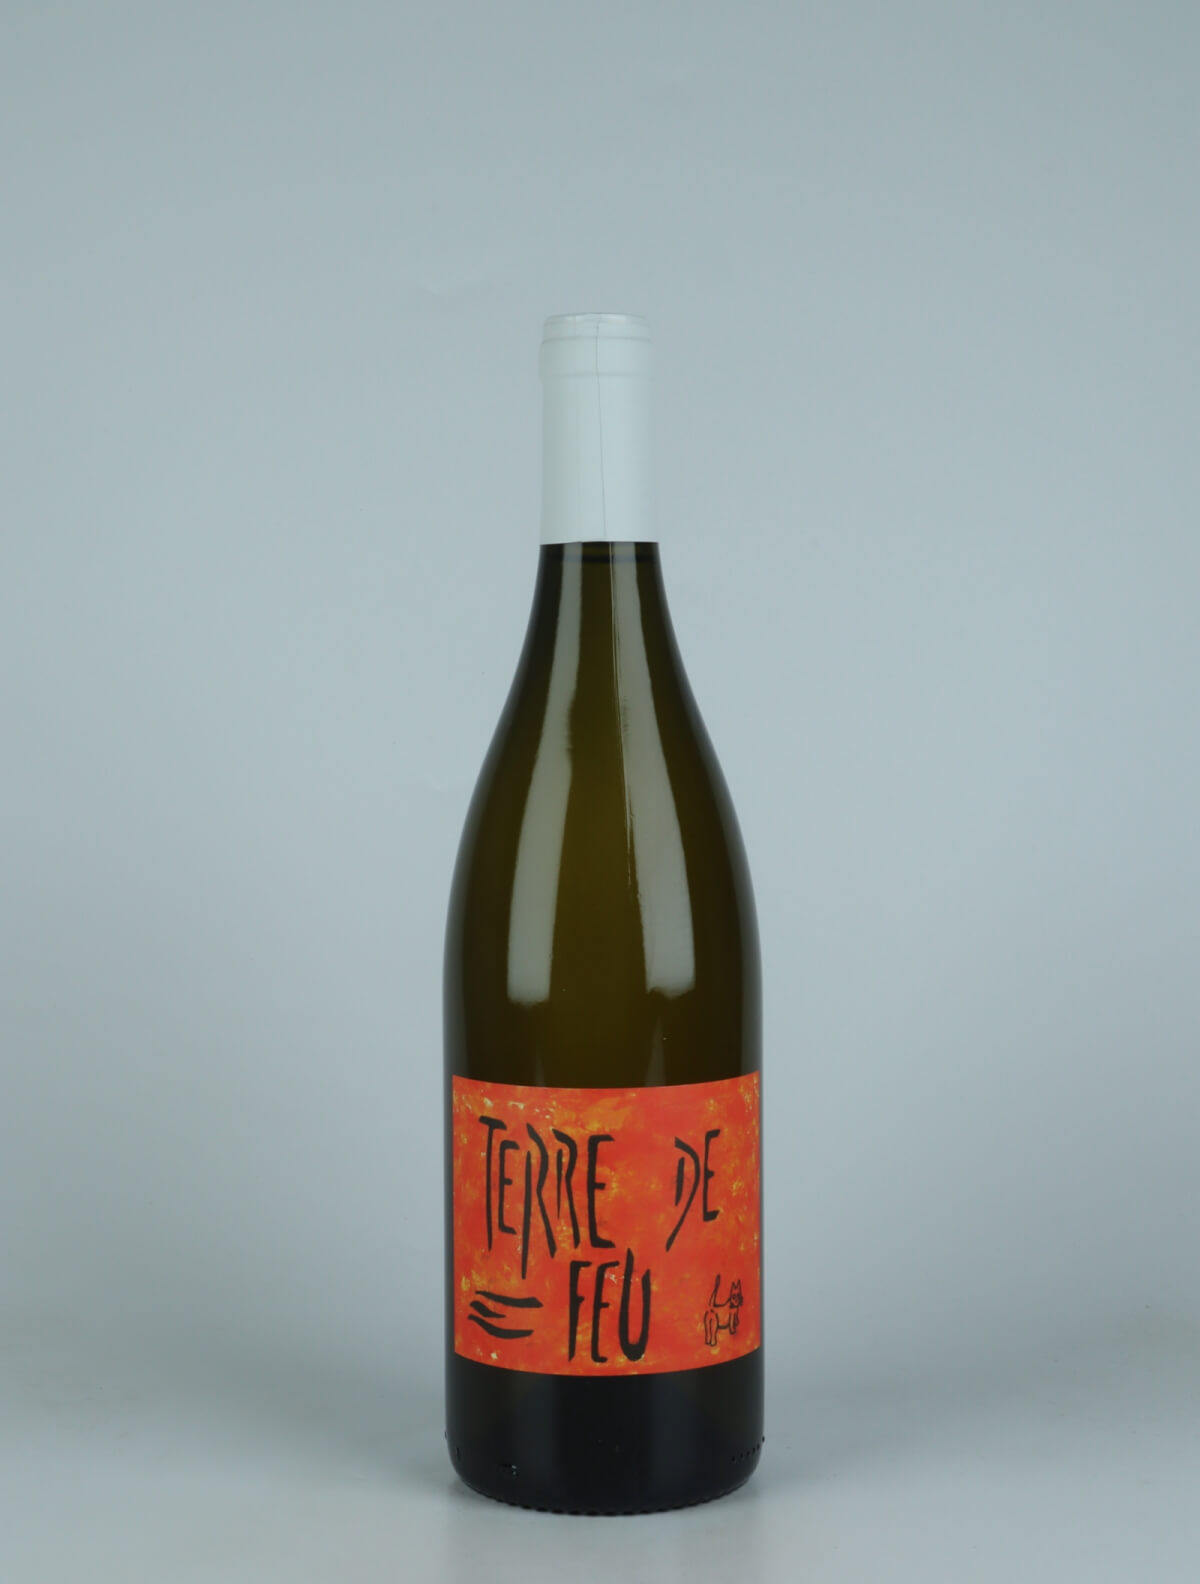 A bottle 2023 Terre de Feu Blanc White wine from Les Foulards Rouges, Languedoc in France